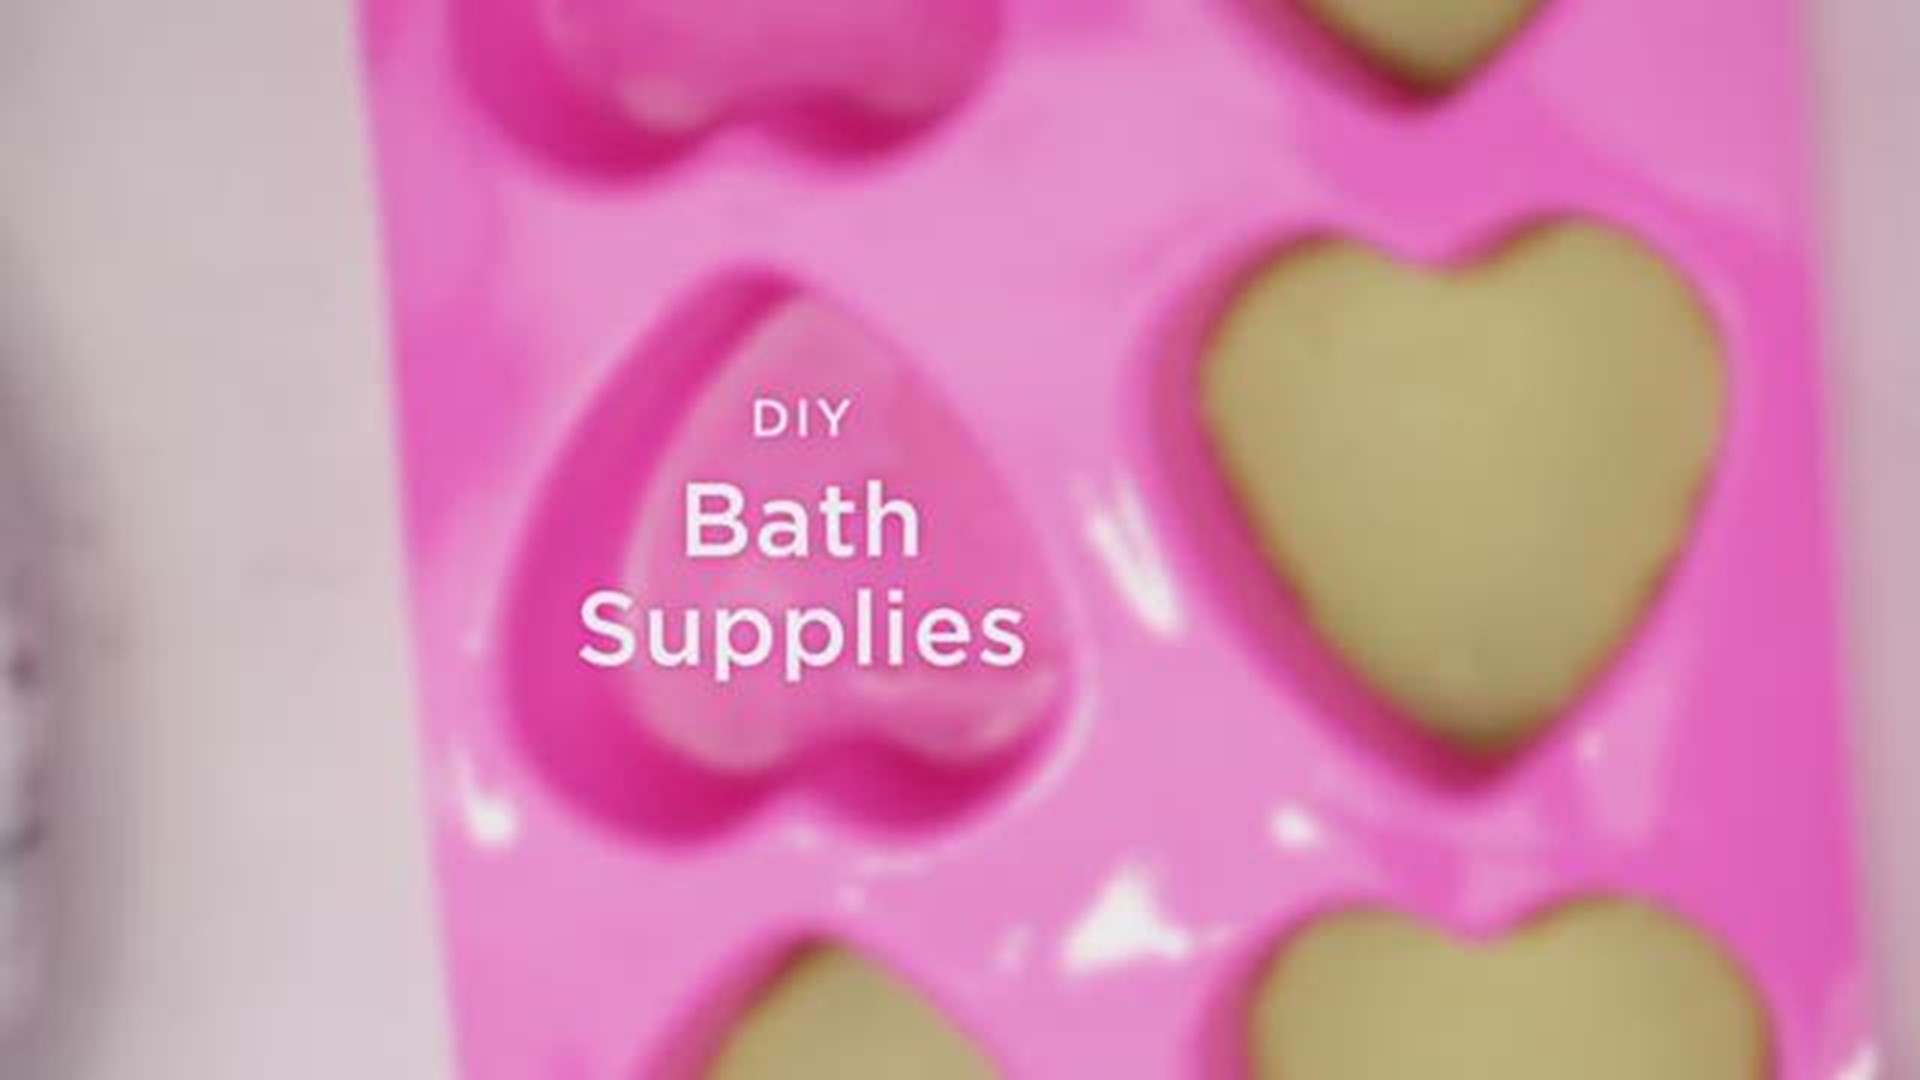 These bath DIYS are the perfect gift to pamper anyone in your life, including yourself! Learn how to make soap, bath bombs, and lotion bars!